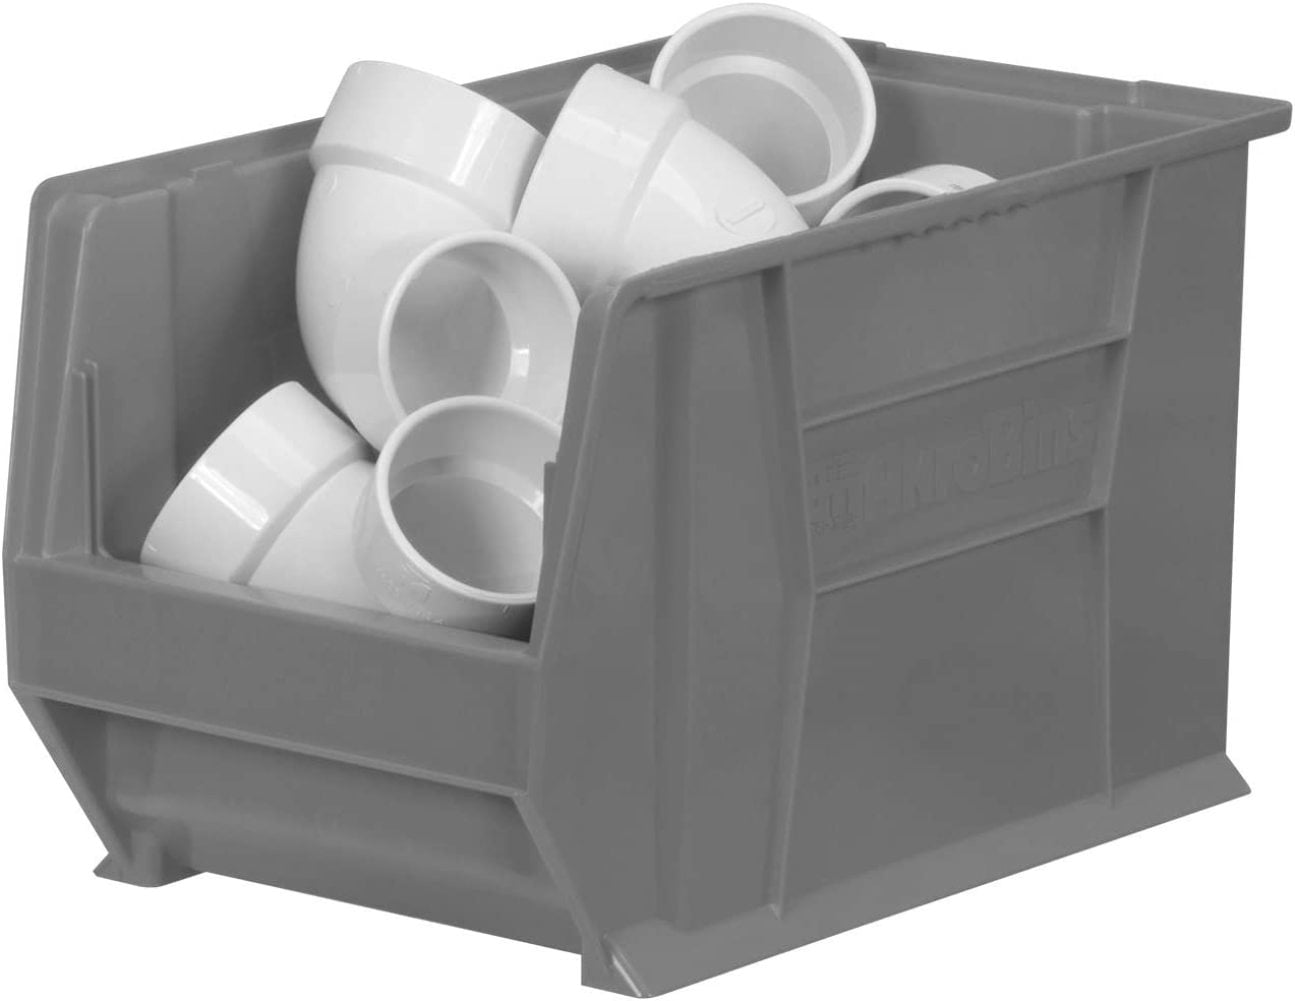 3 Set of 12-Pack Small Stackable Storage Bins - 5 x 4 x 3 Inches, Kitc –  StorageStandard